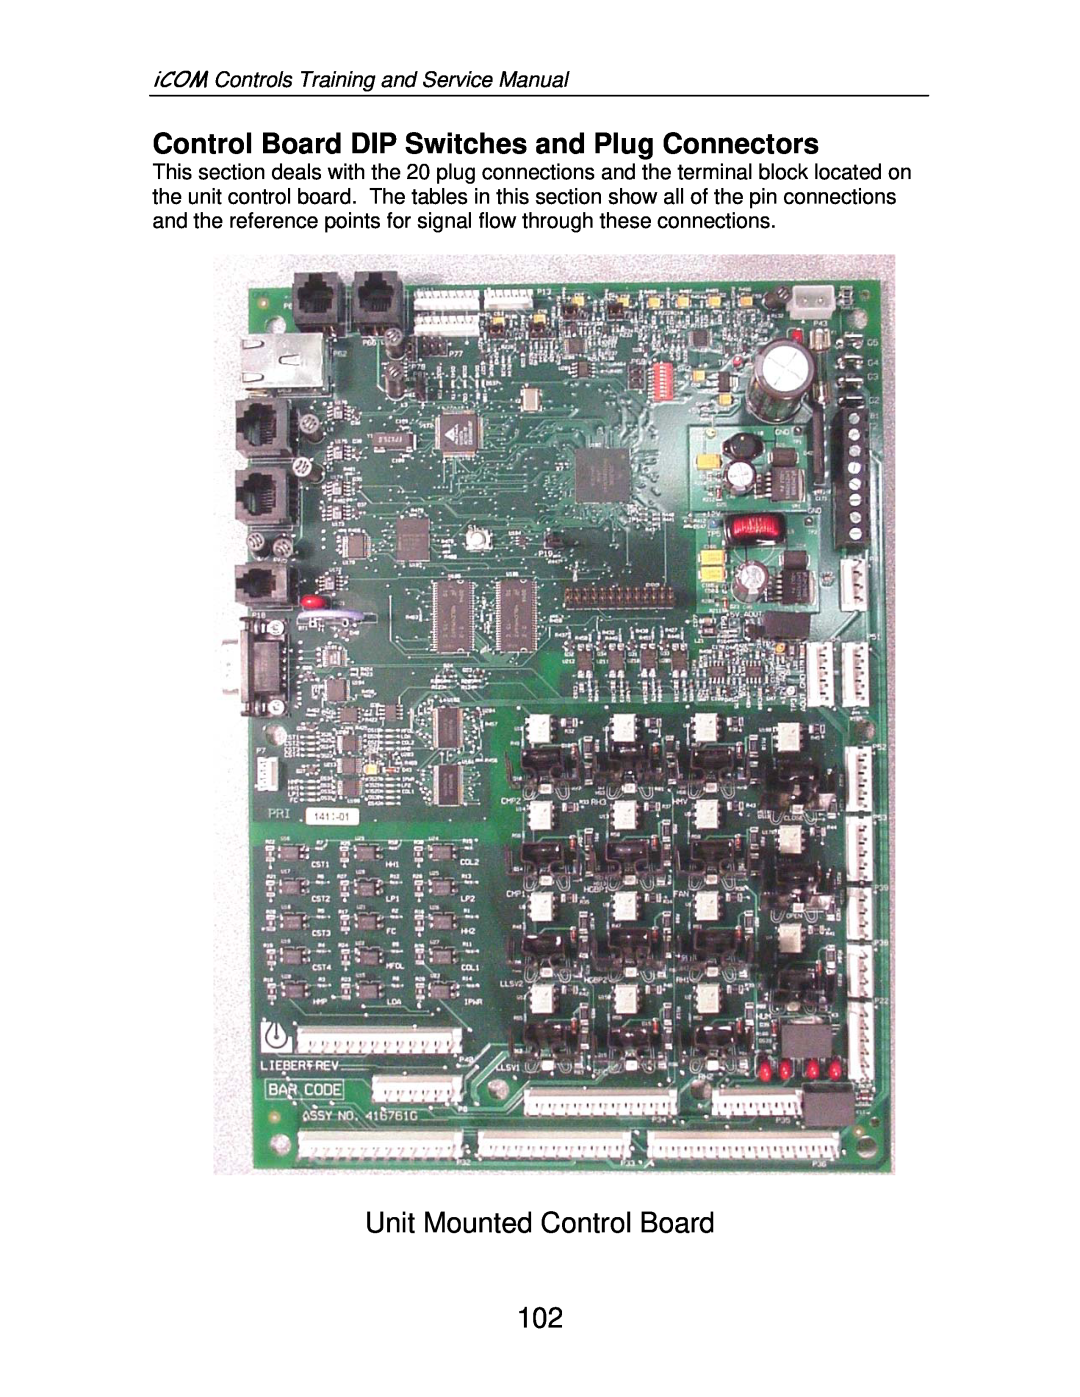 Liebert TM-10098 service manual Control Board DIP Switches and Plug Connectors, Unit Mounted Control Board 